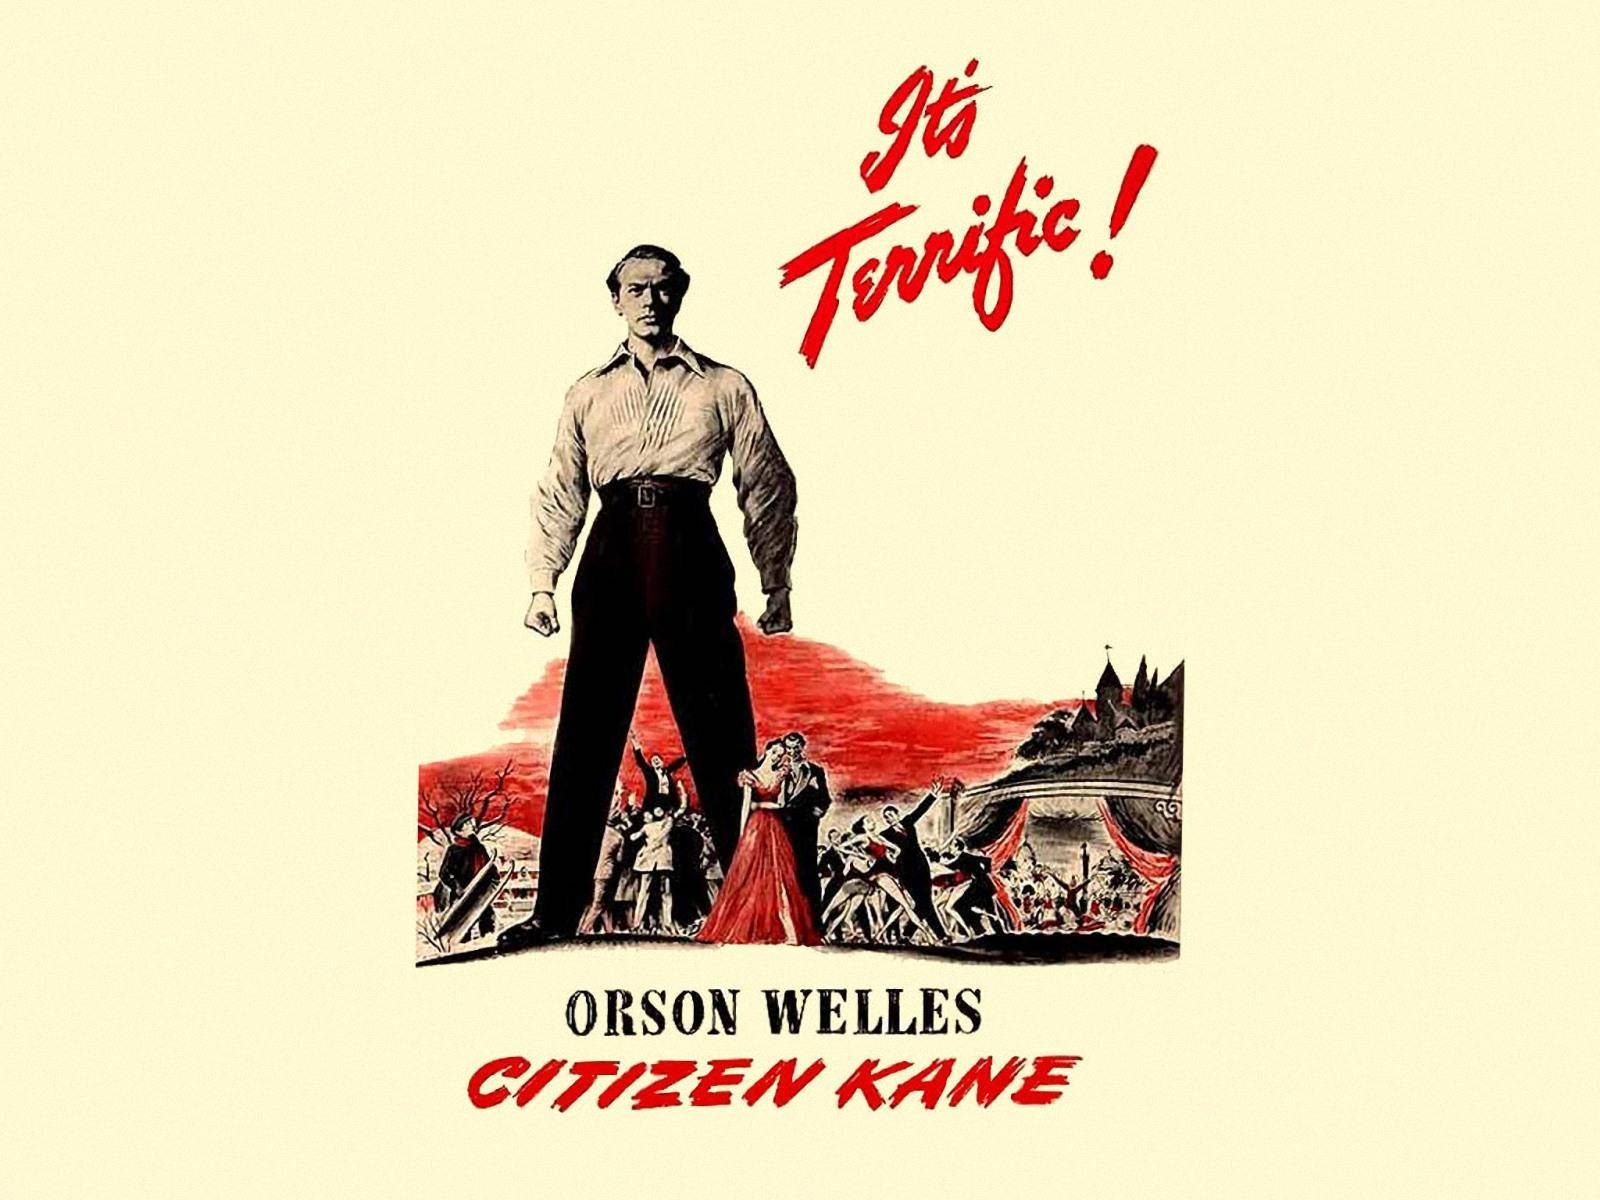 Citizen Kane By Orson Welles Vintage Movie Poster Background